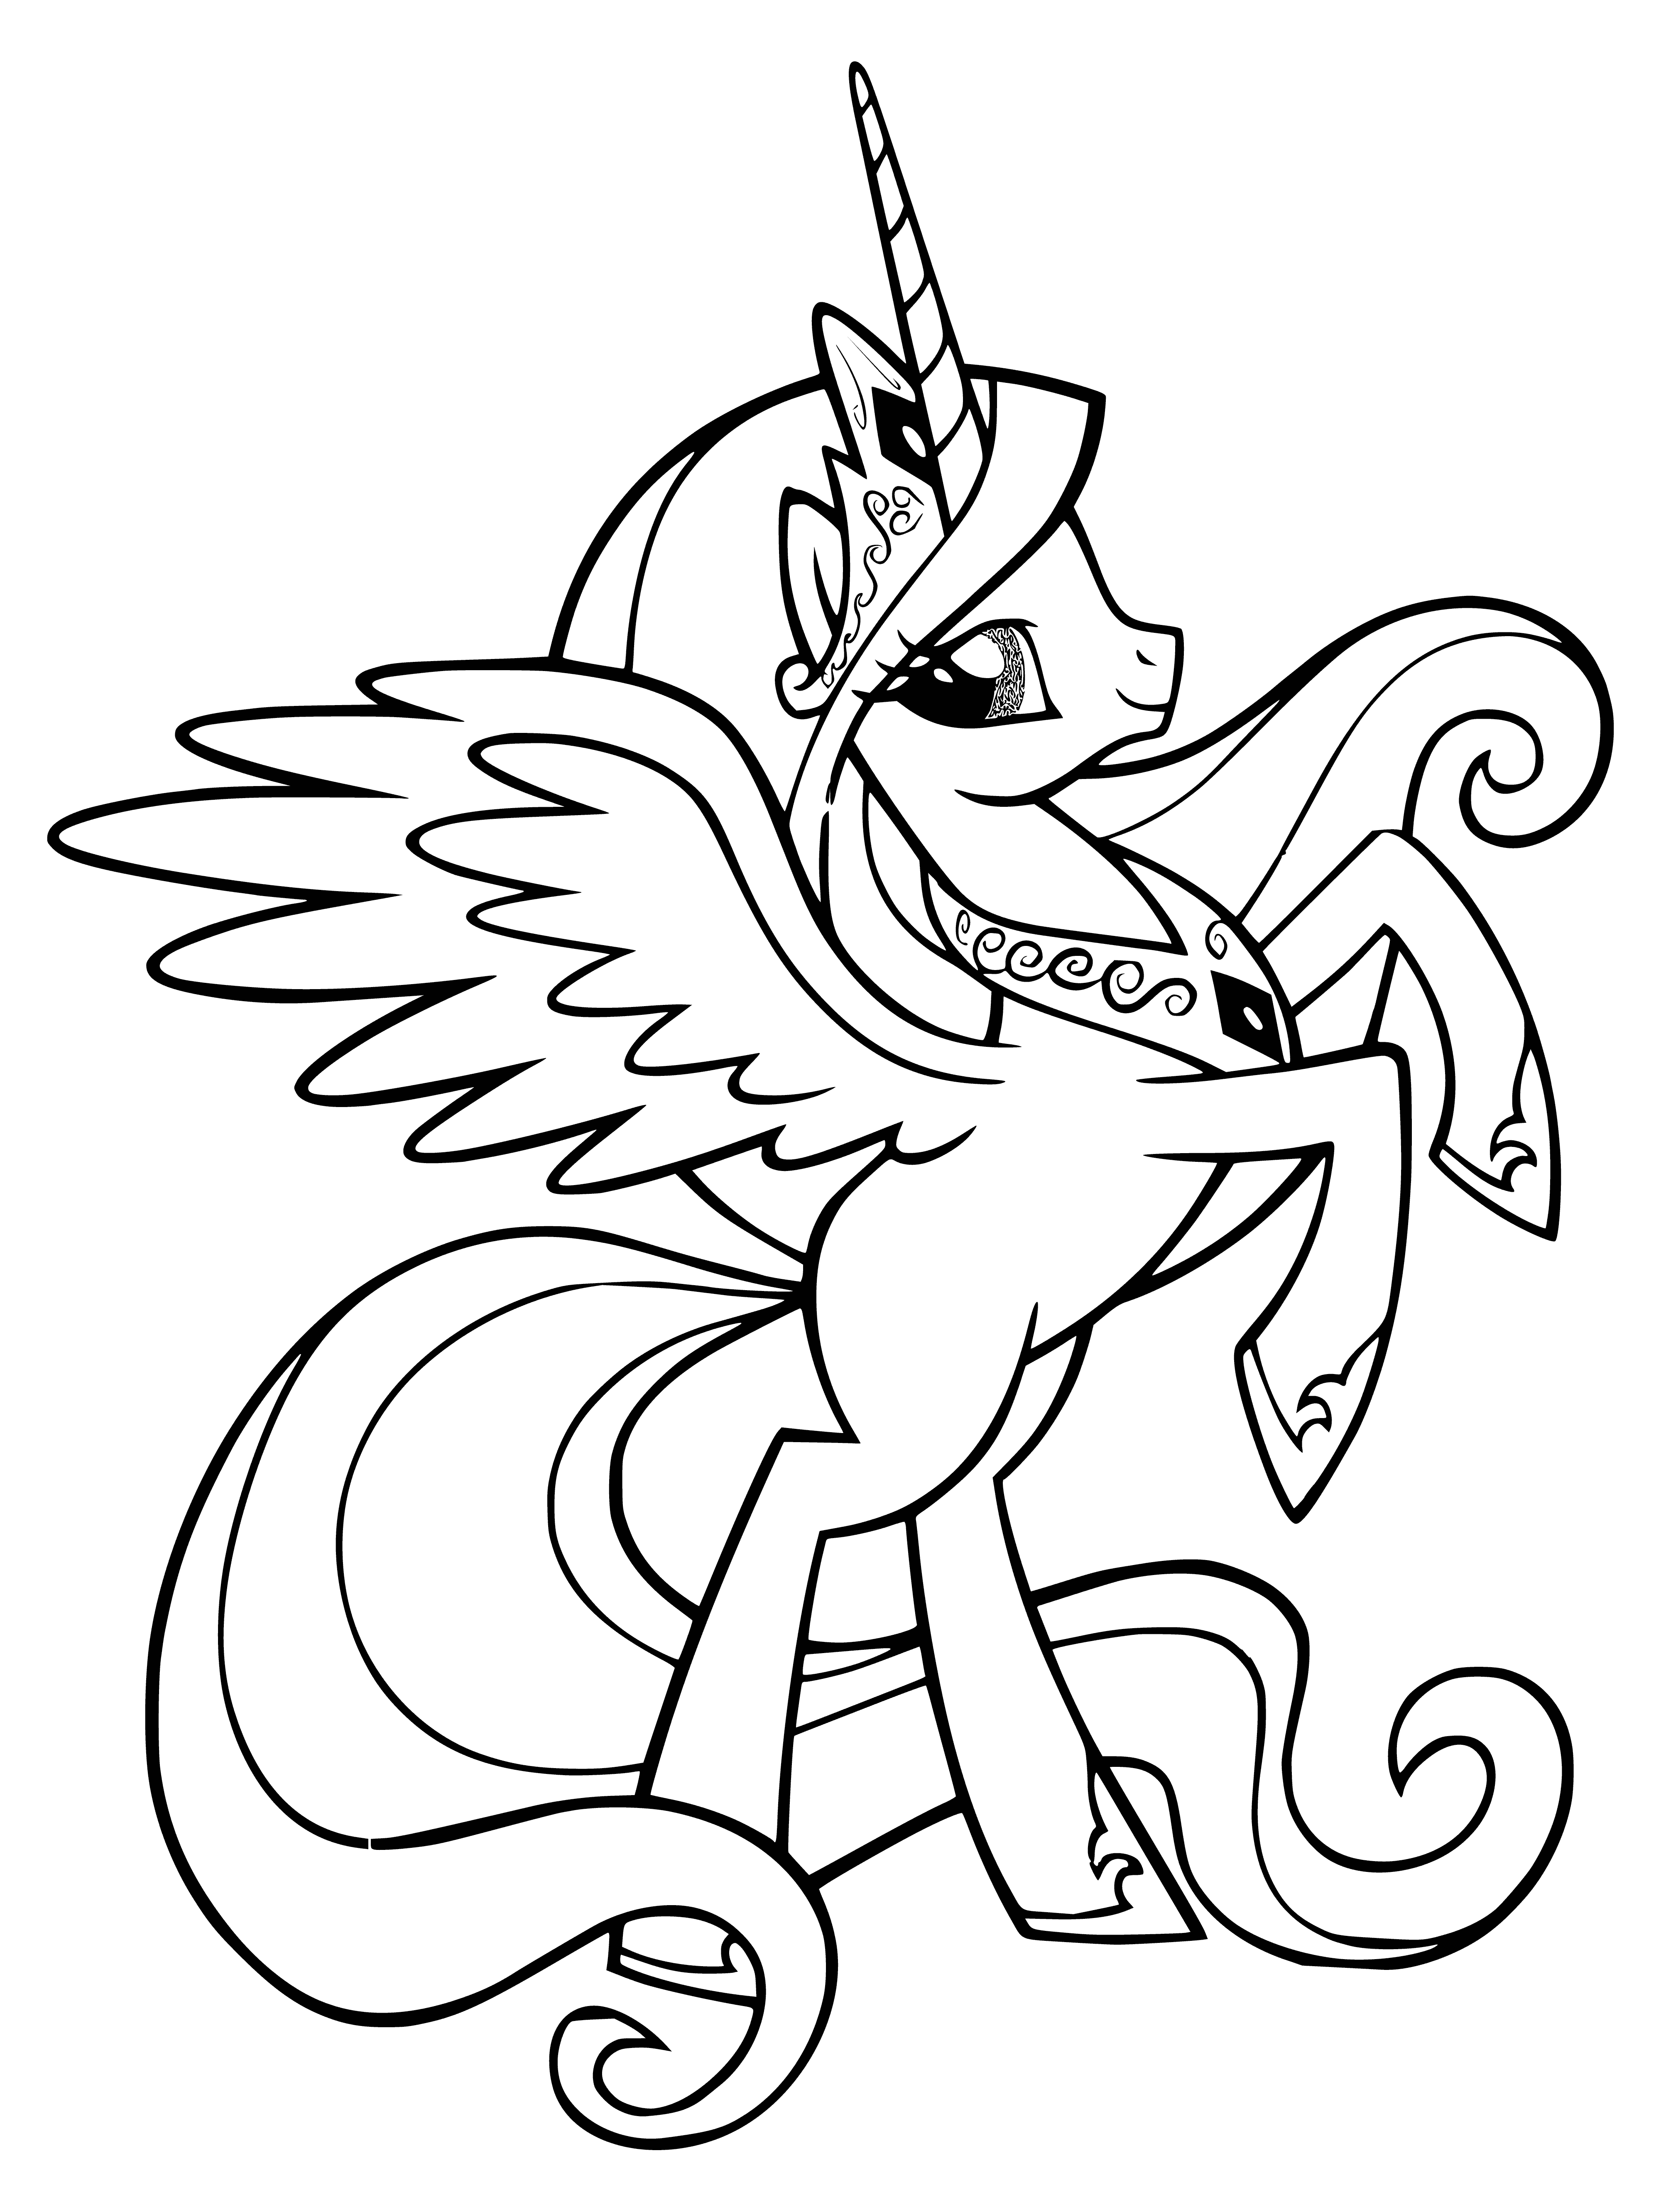 coloring page: Princess Celestia: serene expression, shimmering blue eyes, golden crown, glittering cape, could light up the night sky with her magic.